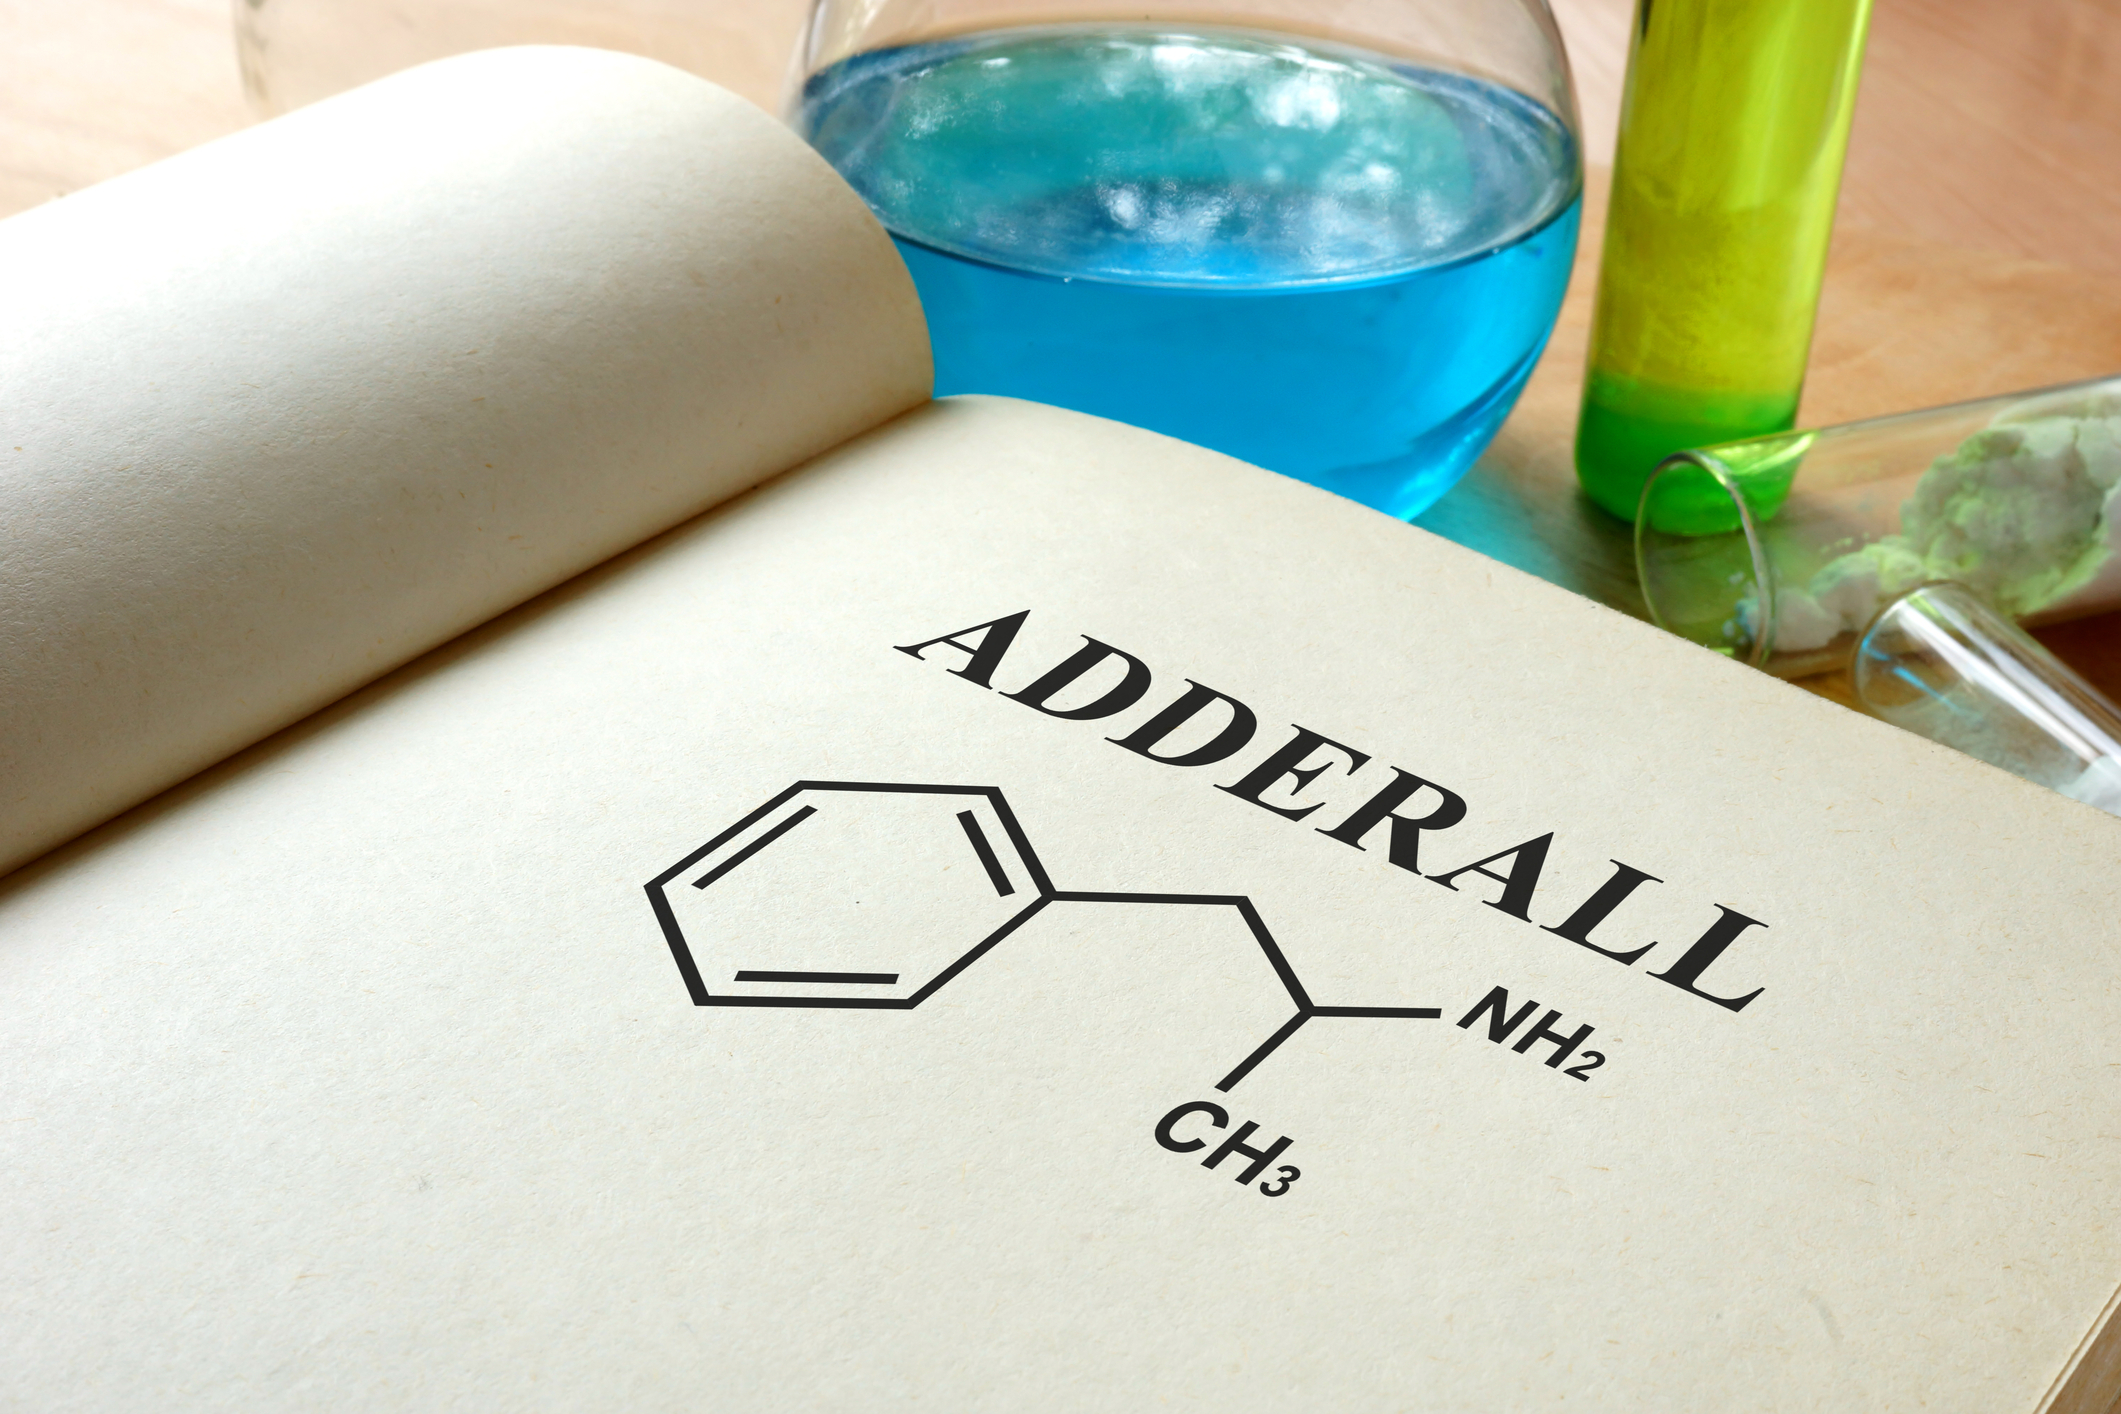 Does Childhood Use of Adderall Affect the Probability of Developing SUDs?